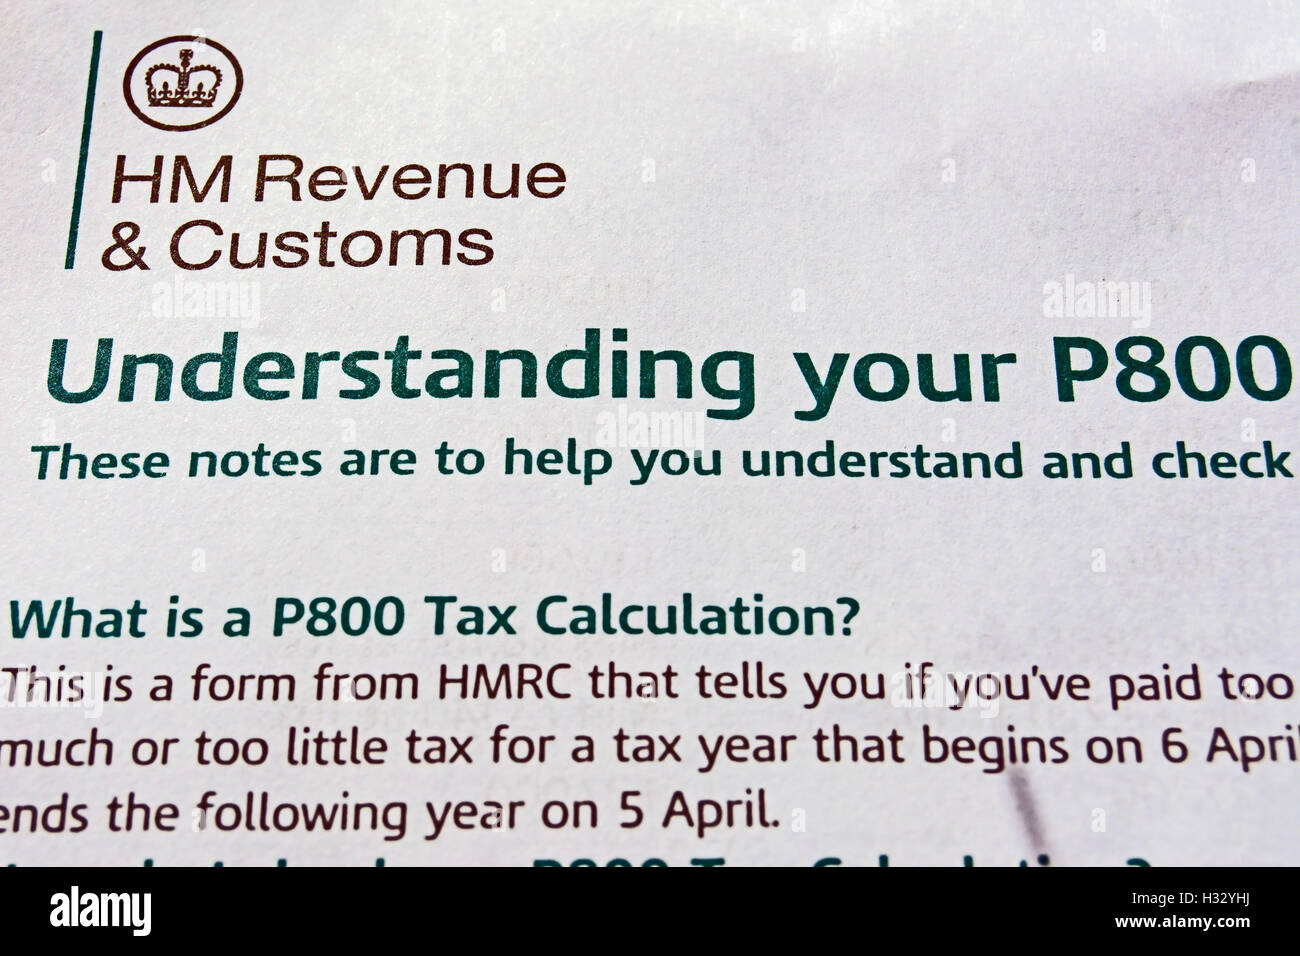 understanding-your-p800-a-form-issued-by-hm-revenue-and-customs-to-uk